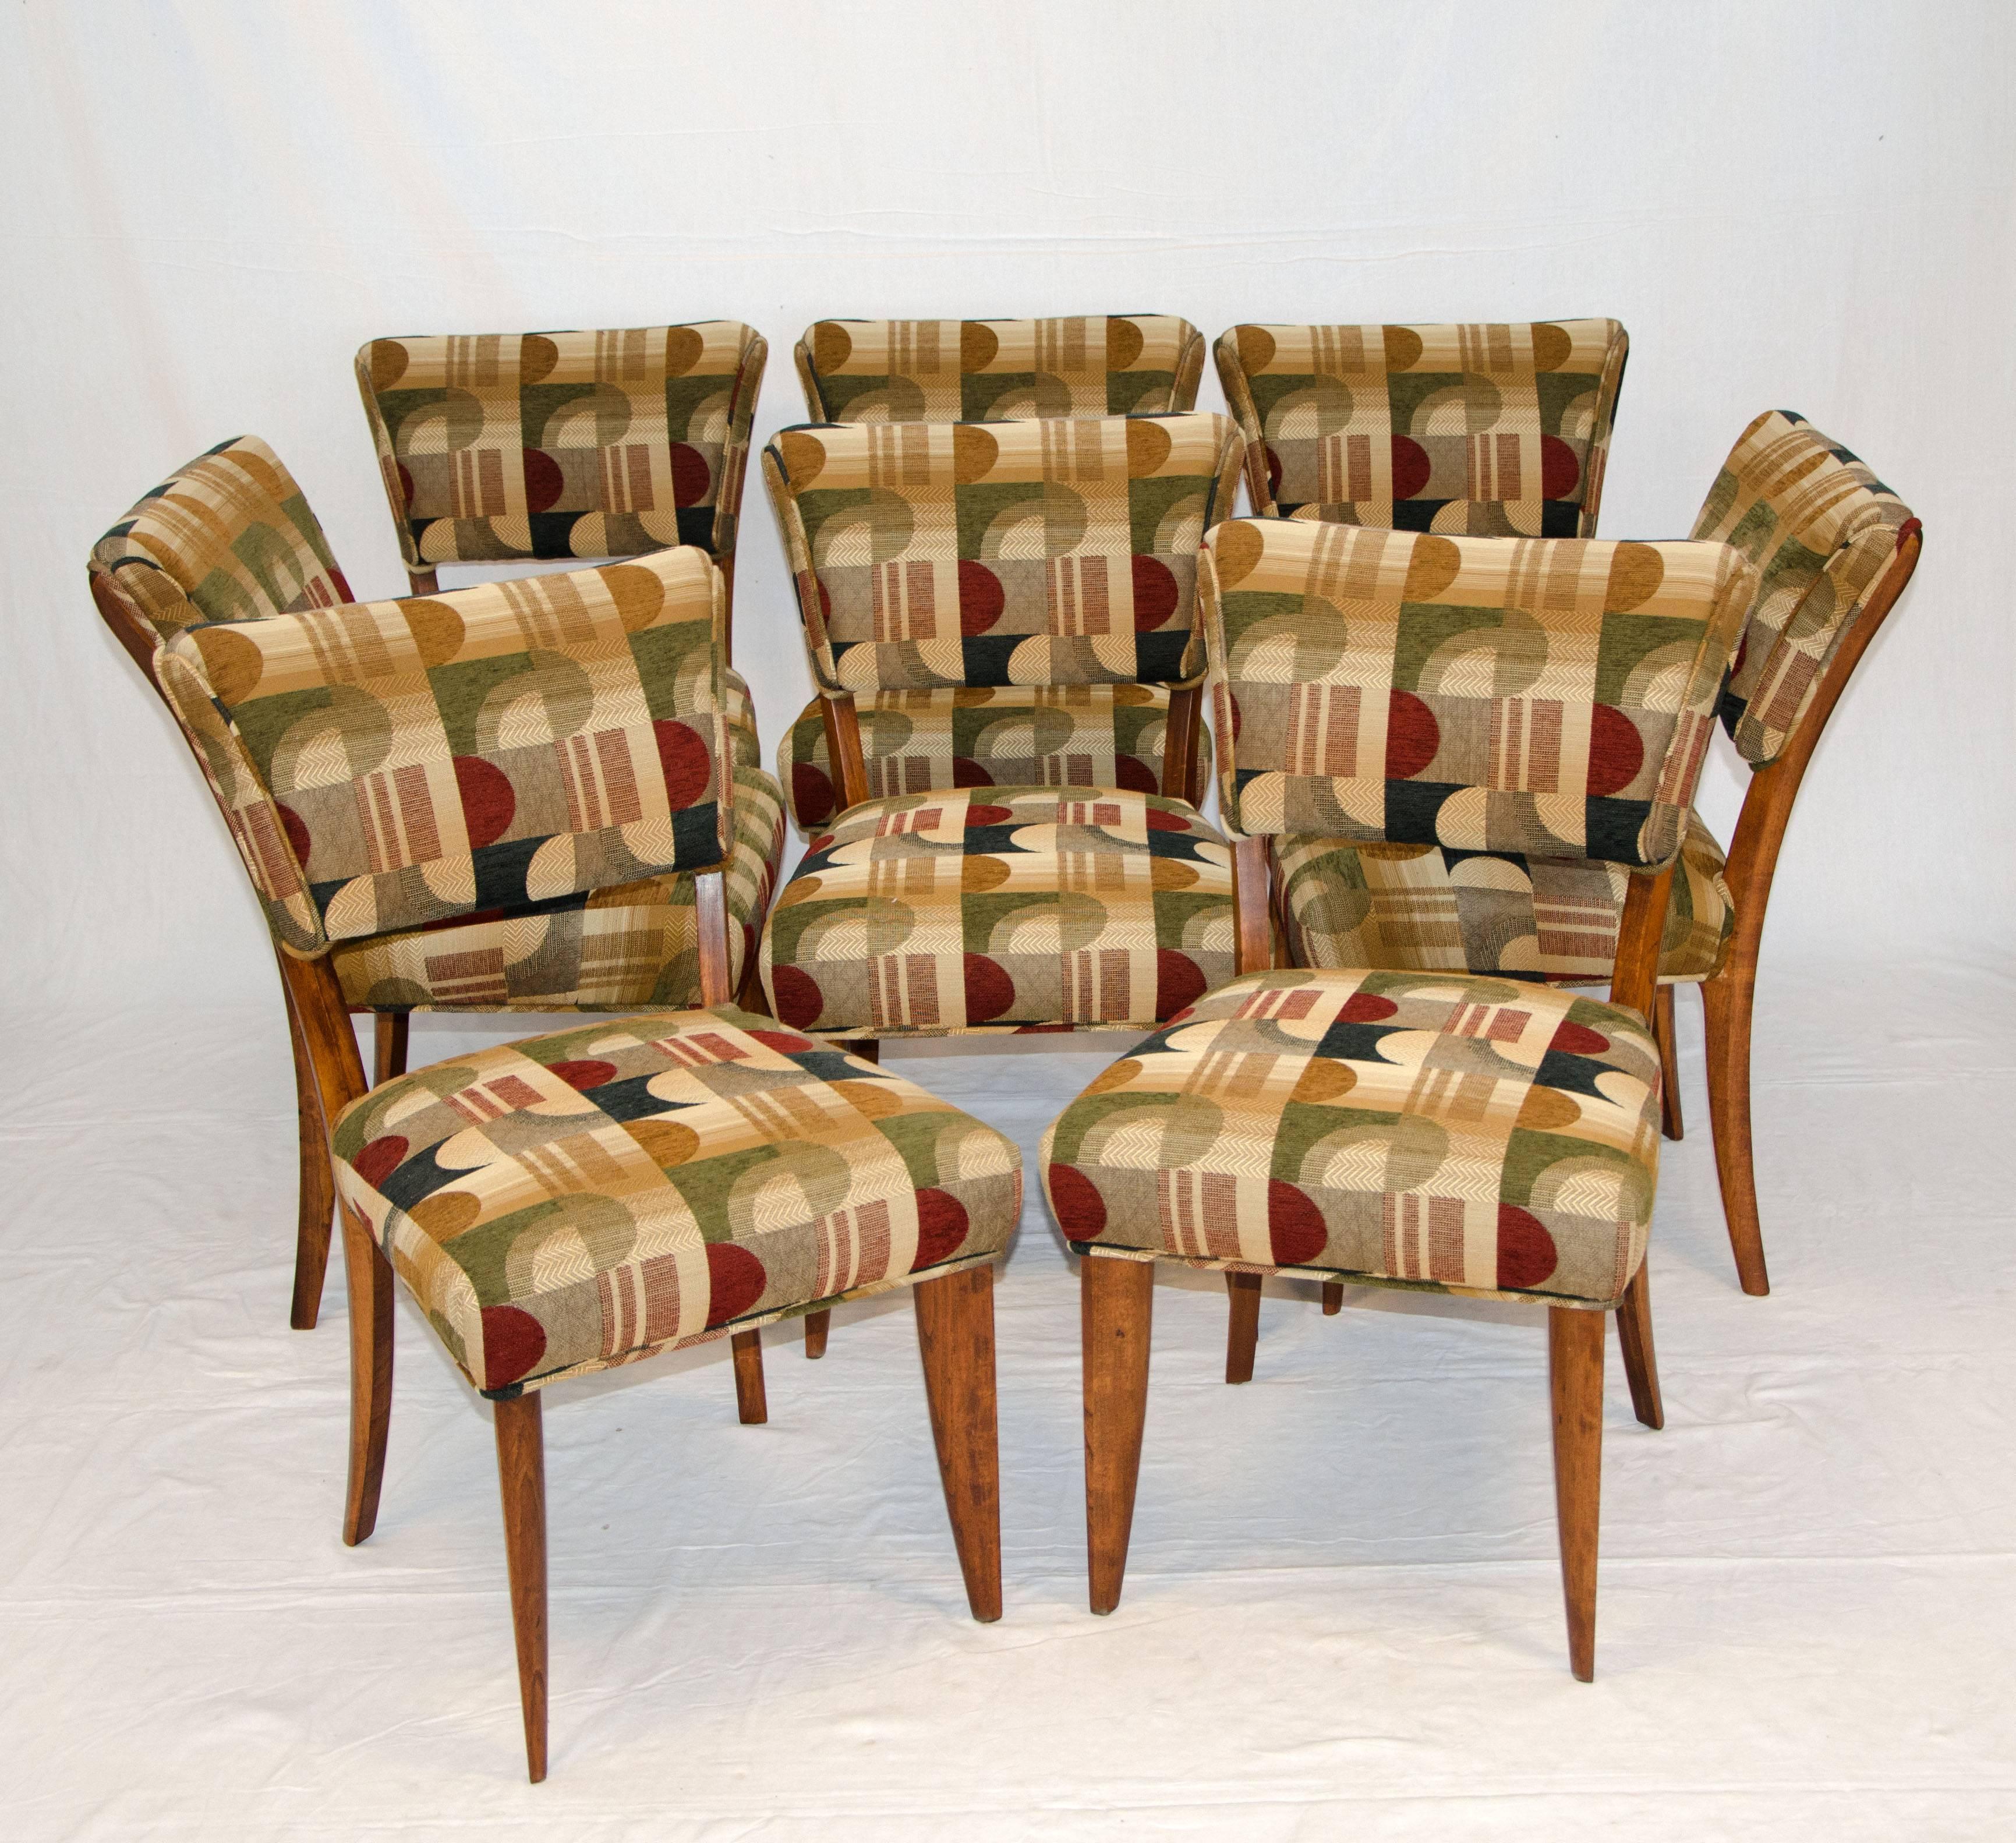 Nice set of eight dining chairs with upholstered backs and seats. The chair backs are somewhat canted to allow for a comfortable seating position. The front legs are very angular and tapered, they give a "flat" appearance but are about